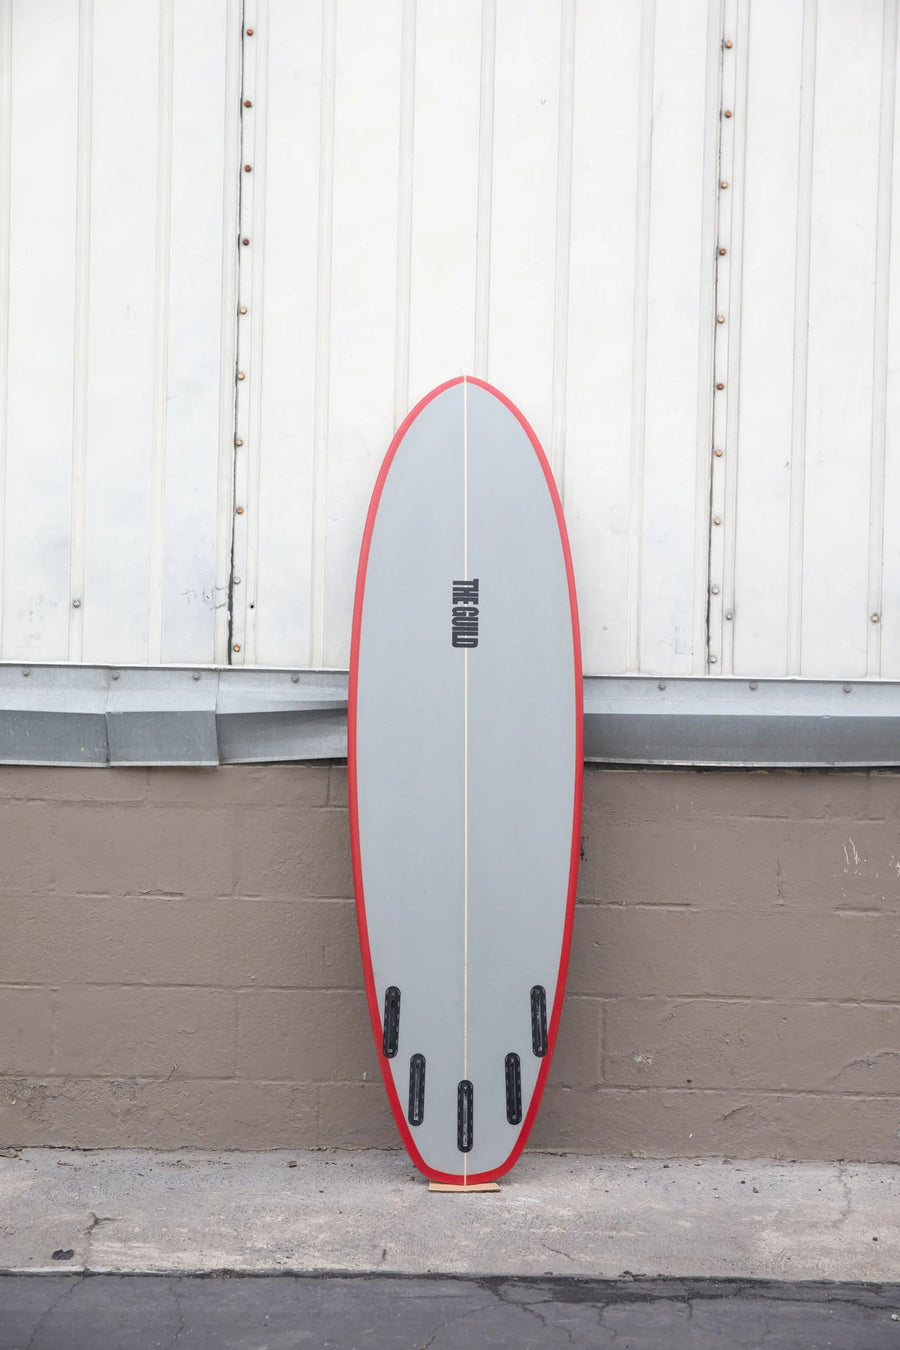 THE GUILD 5'10 MP-EGG - GRAY/RED AIRBRUSH - Surf Bored